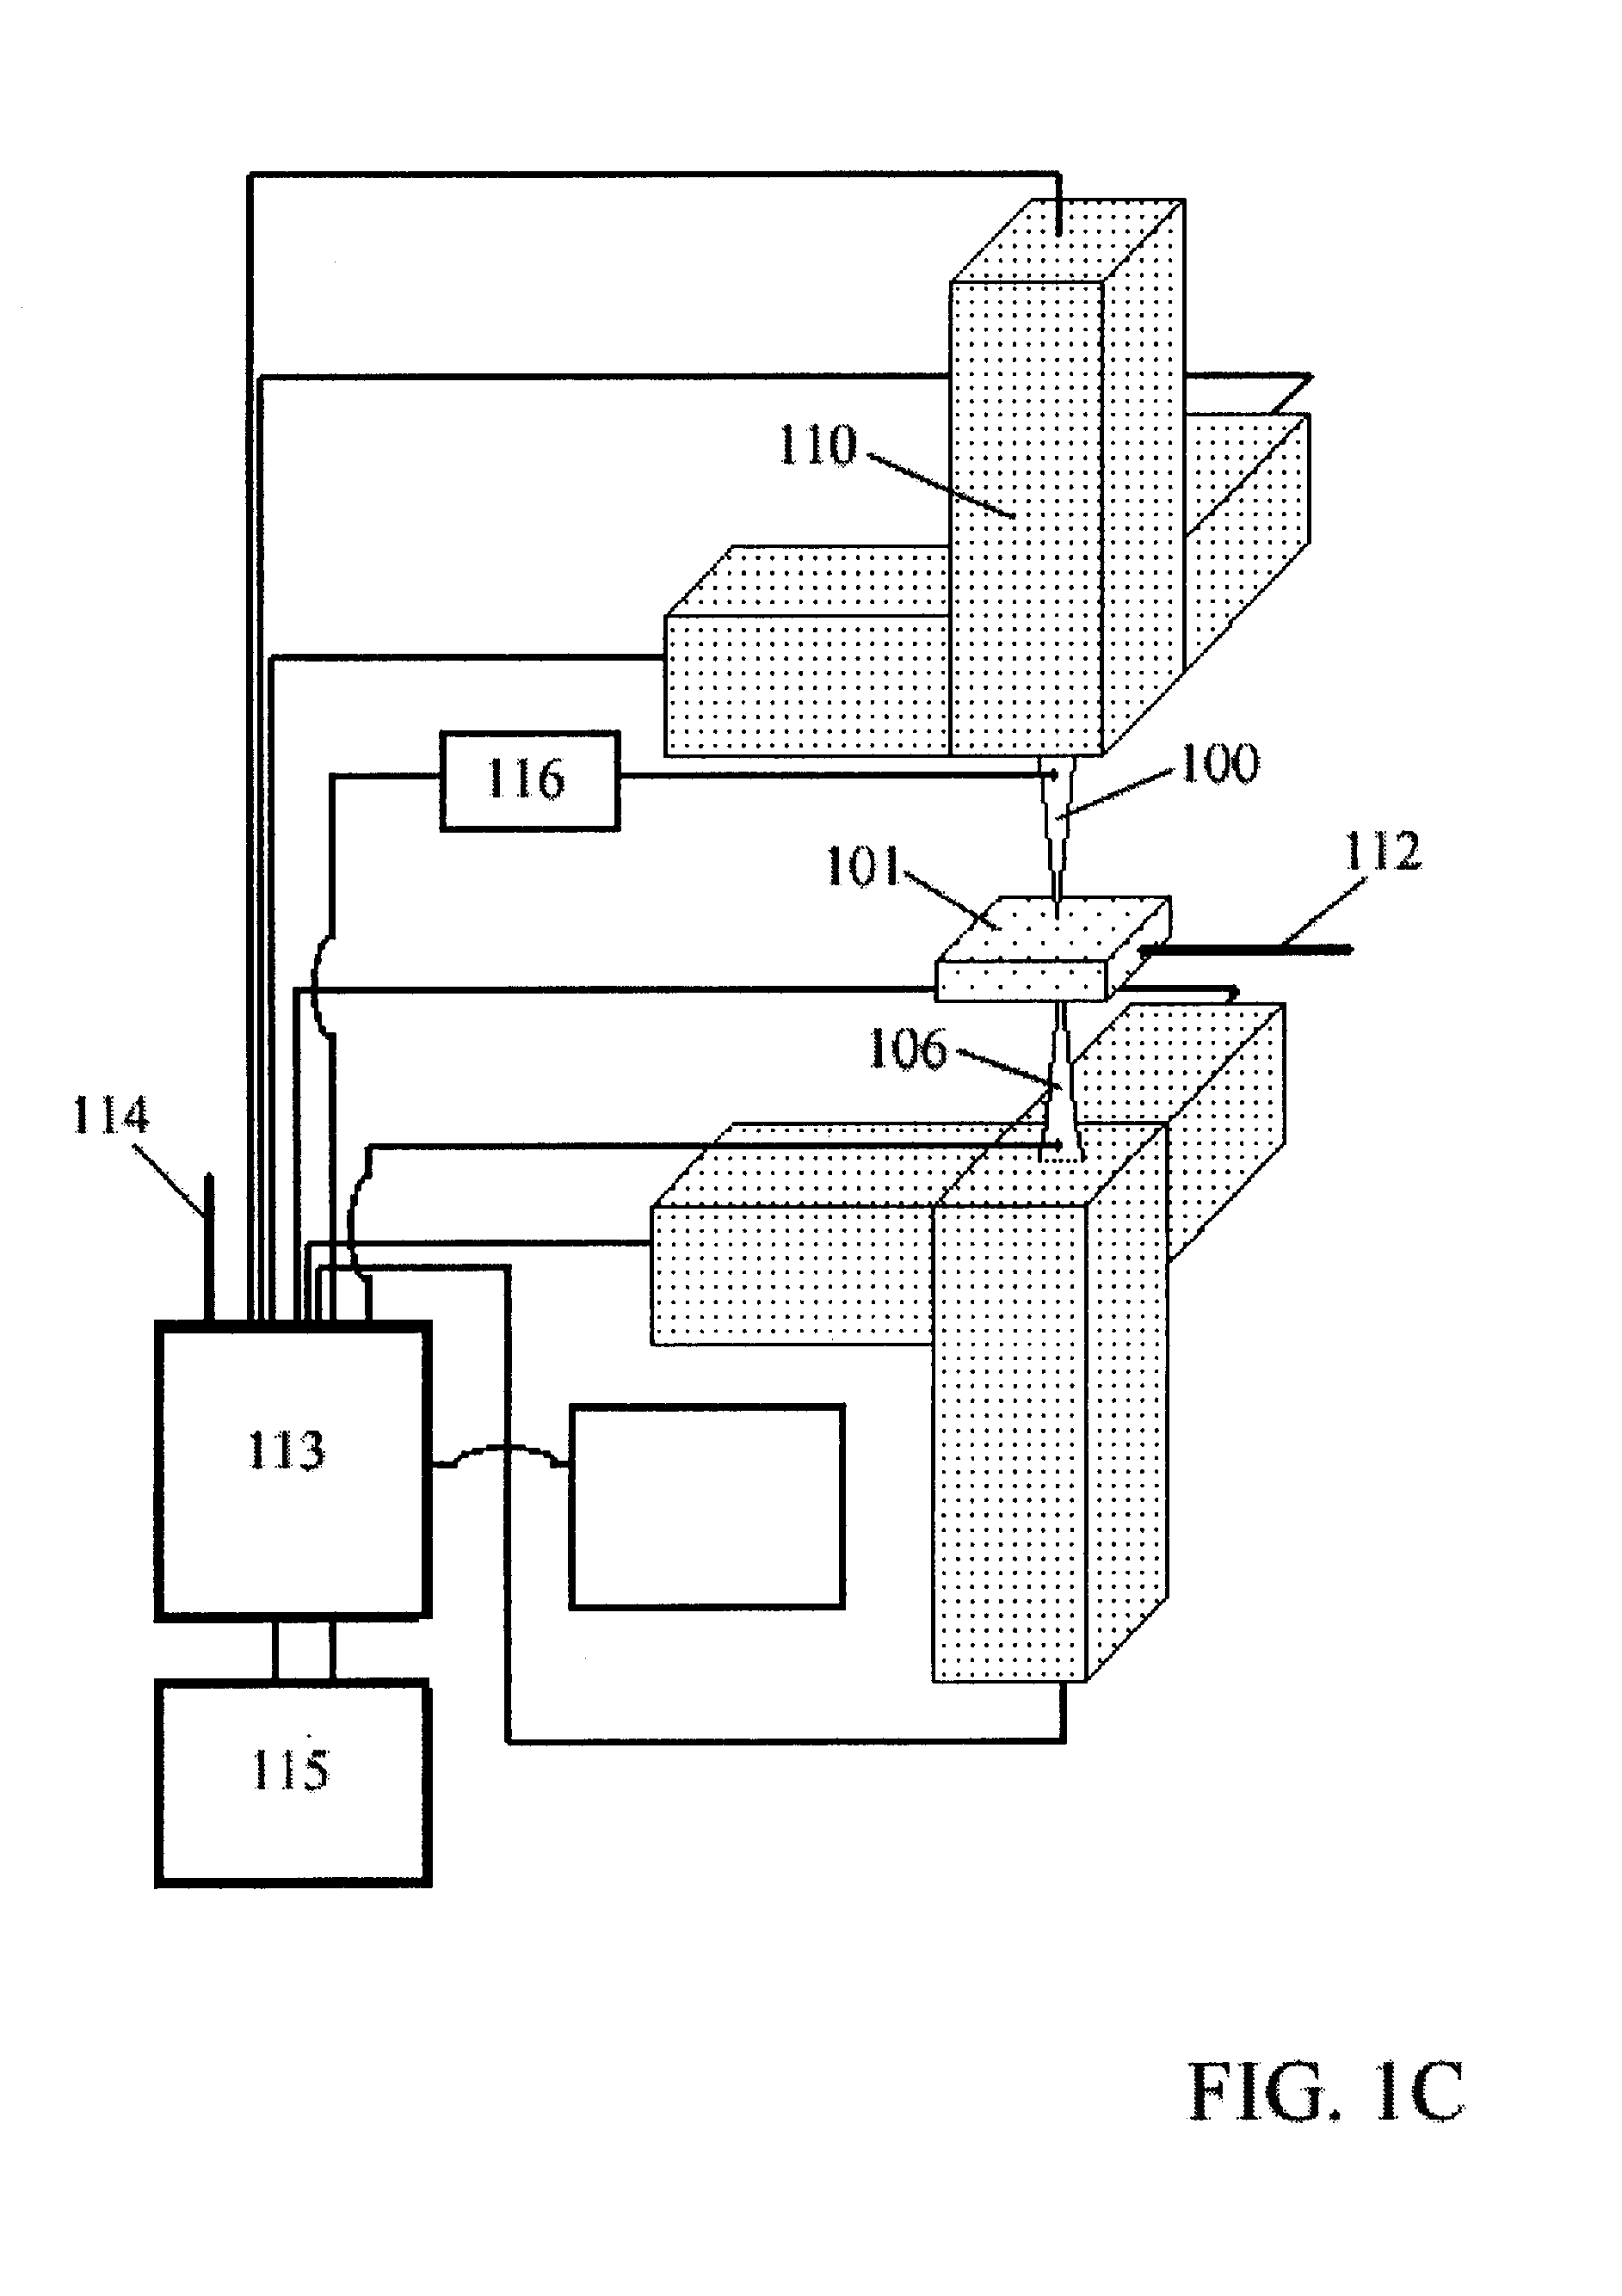 Technique and process for the imaging and formation of various devices and surfaces